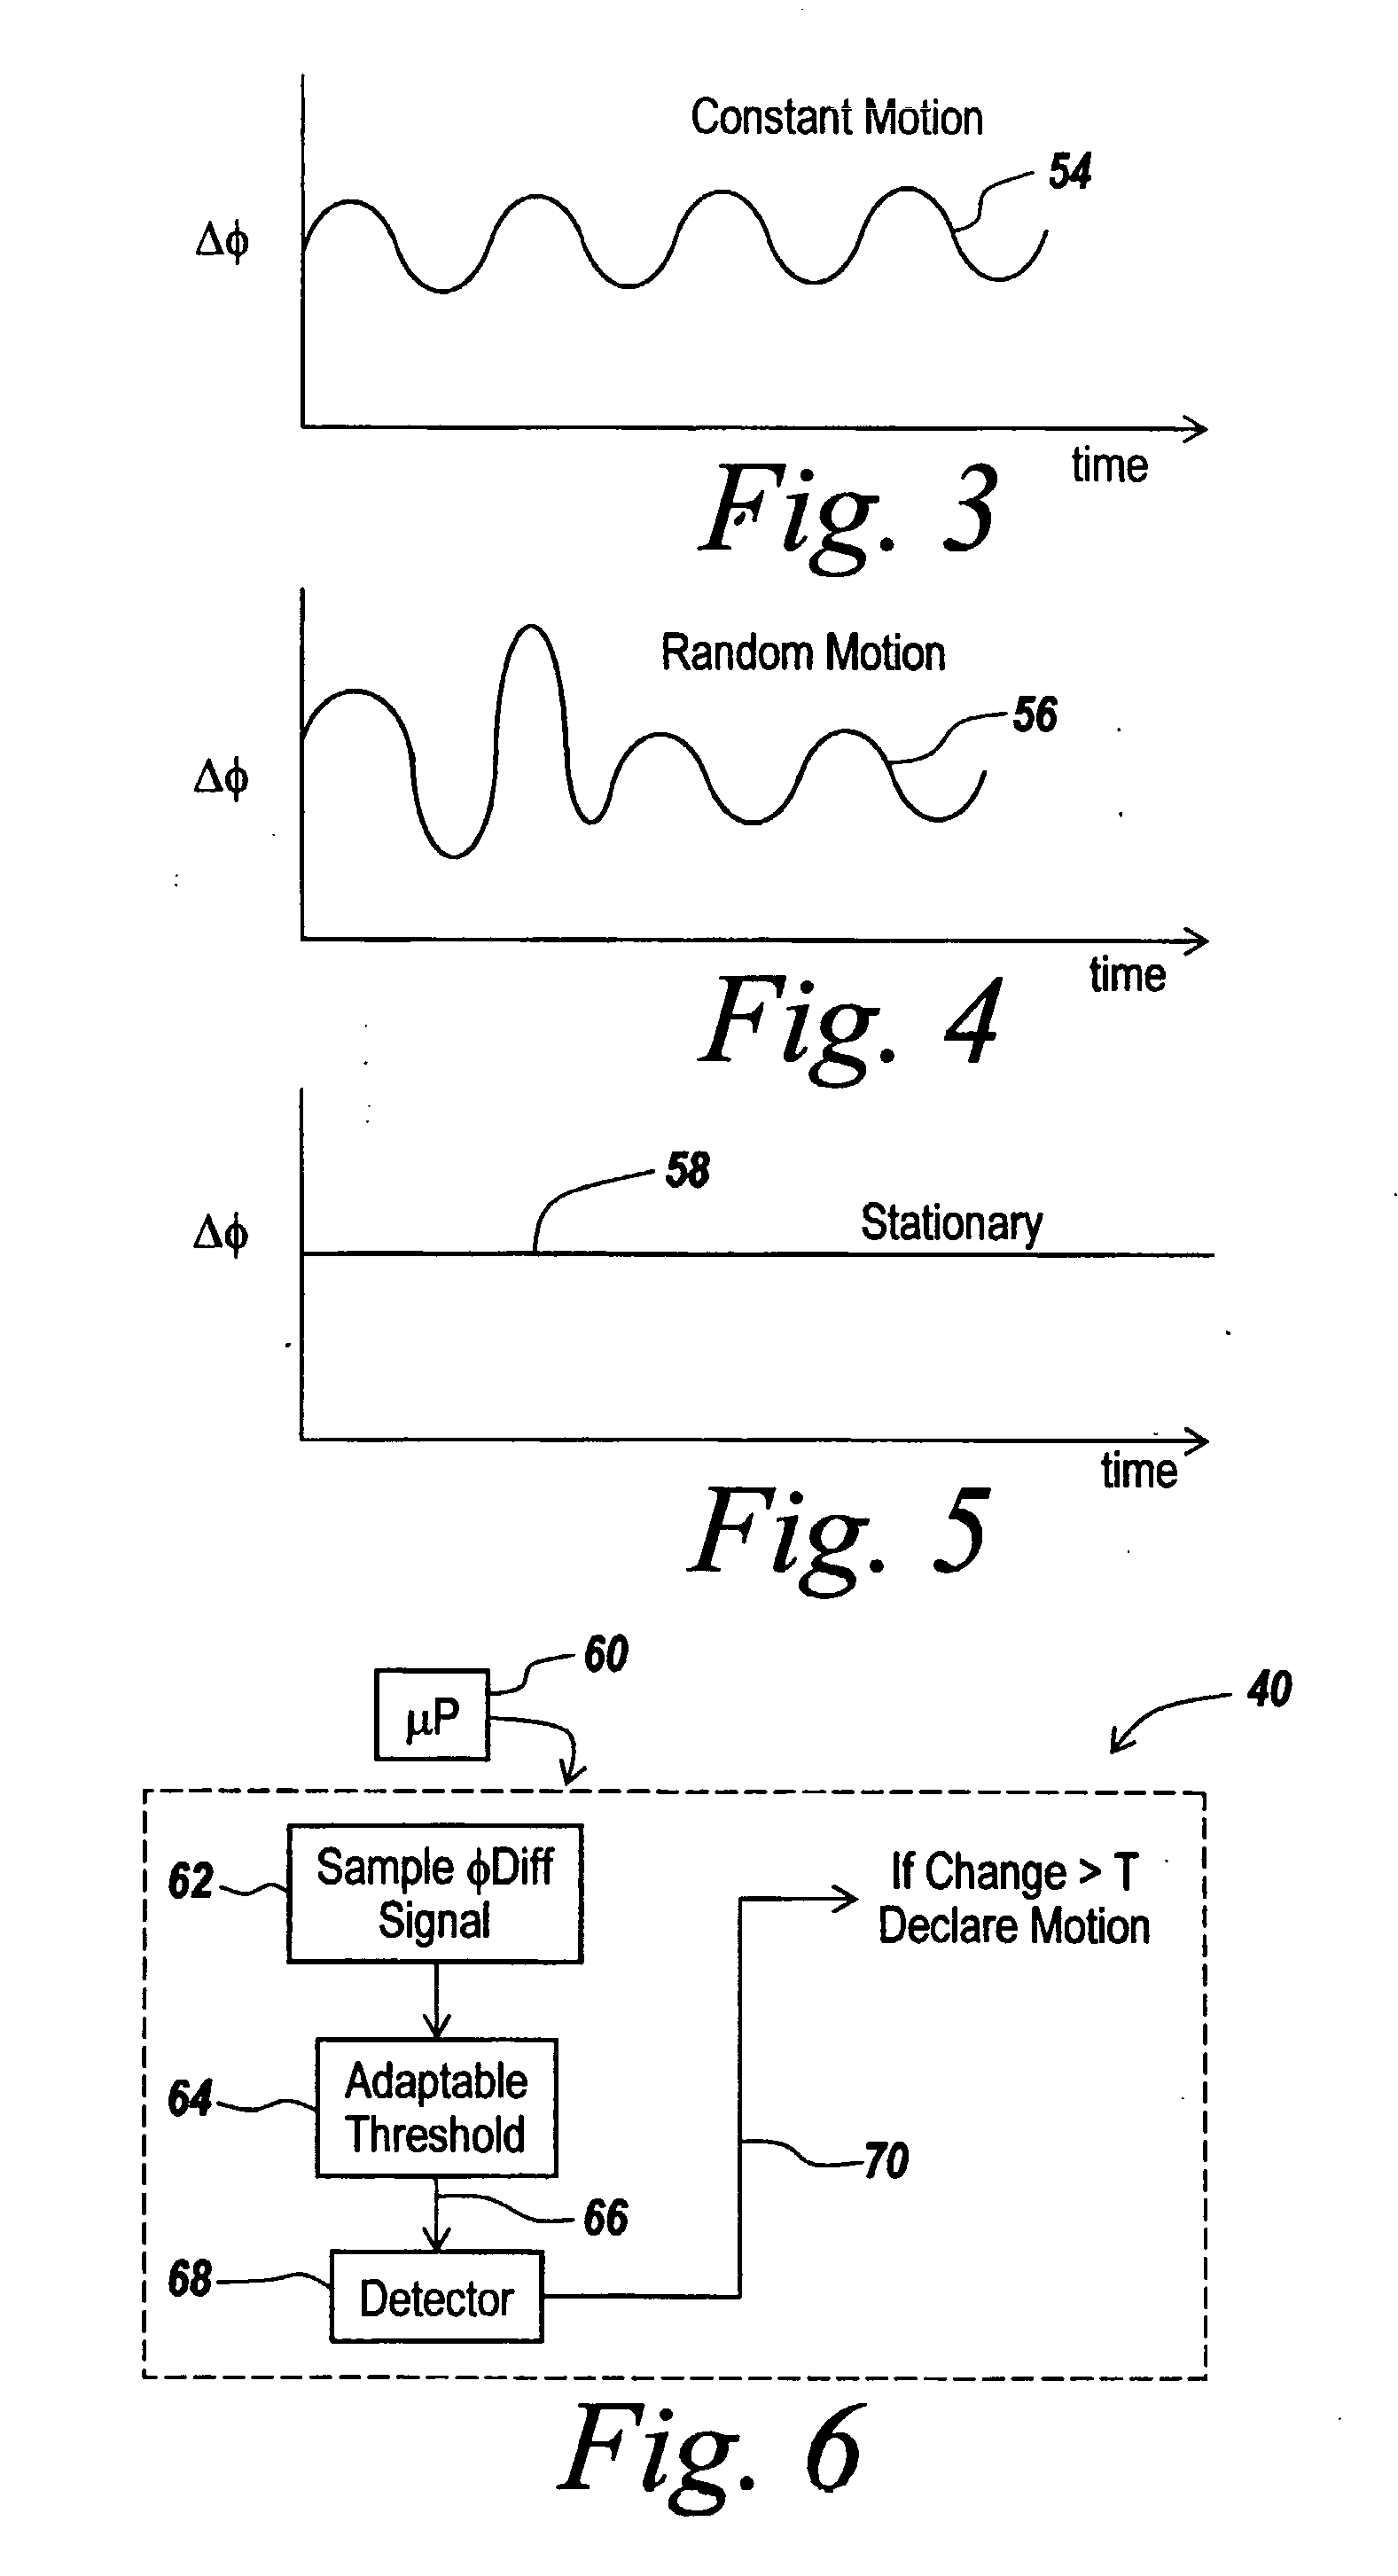 Method and apparatus for through-the-wall motion detection utilizing cw radar